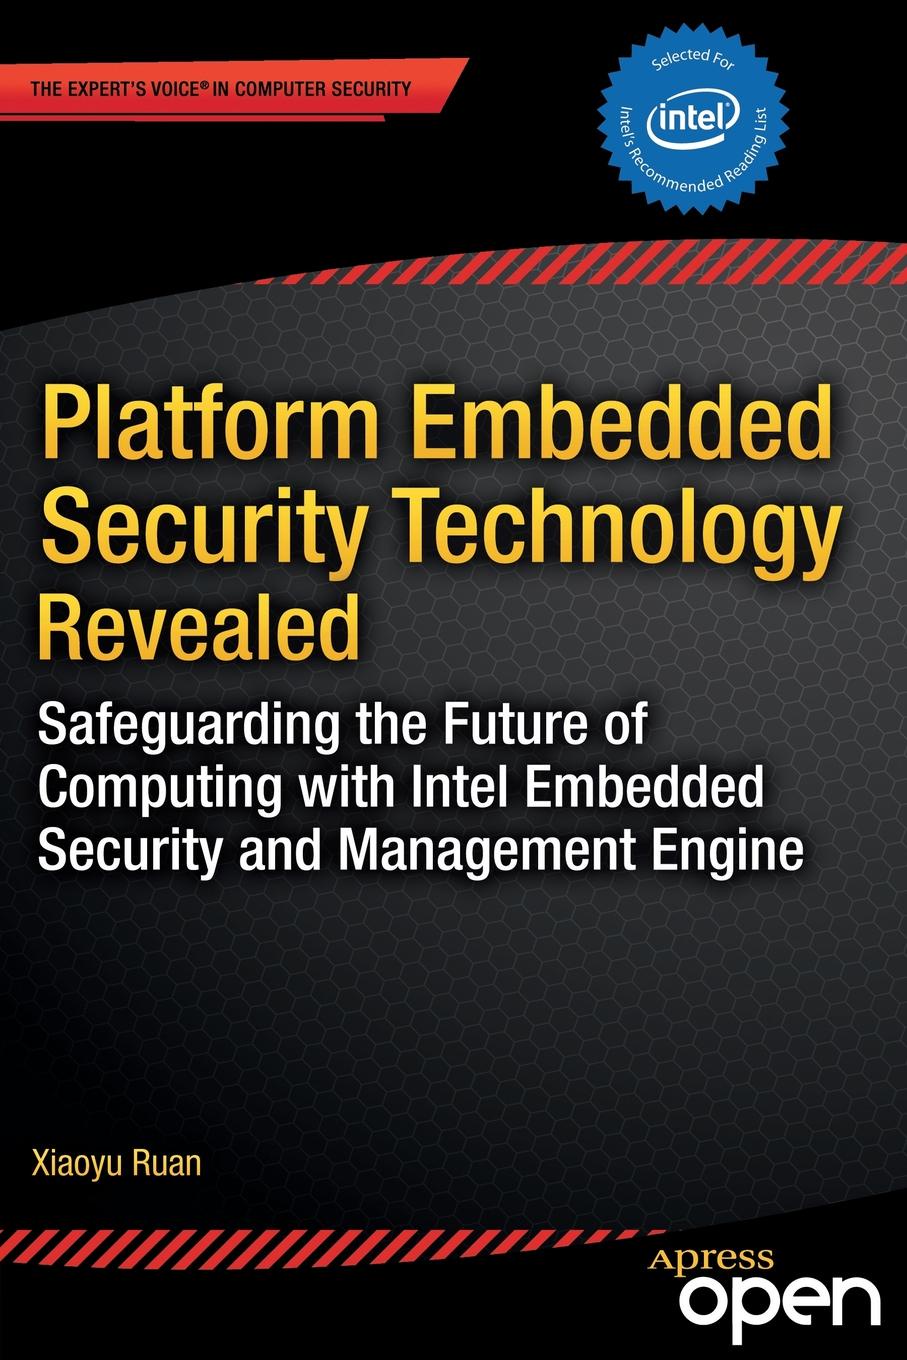 Platform Embedded Security Technology Revealed. Safeguarding the Future of Computing with Intel Embedded Security and Management Engine